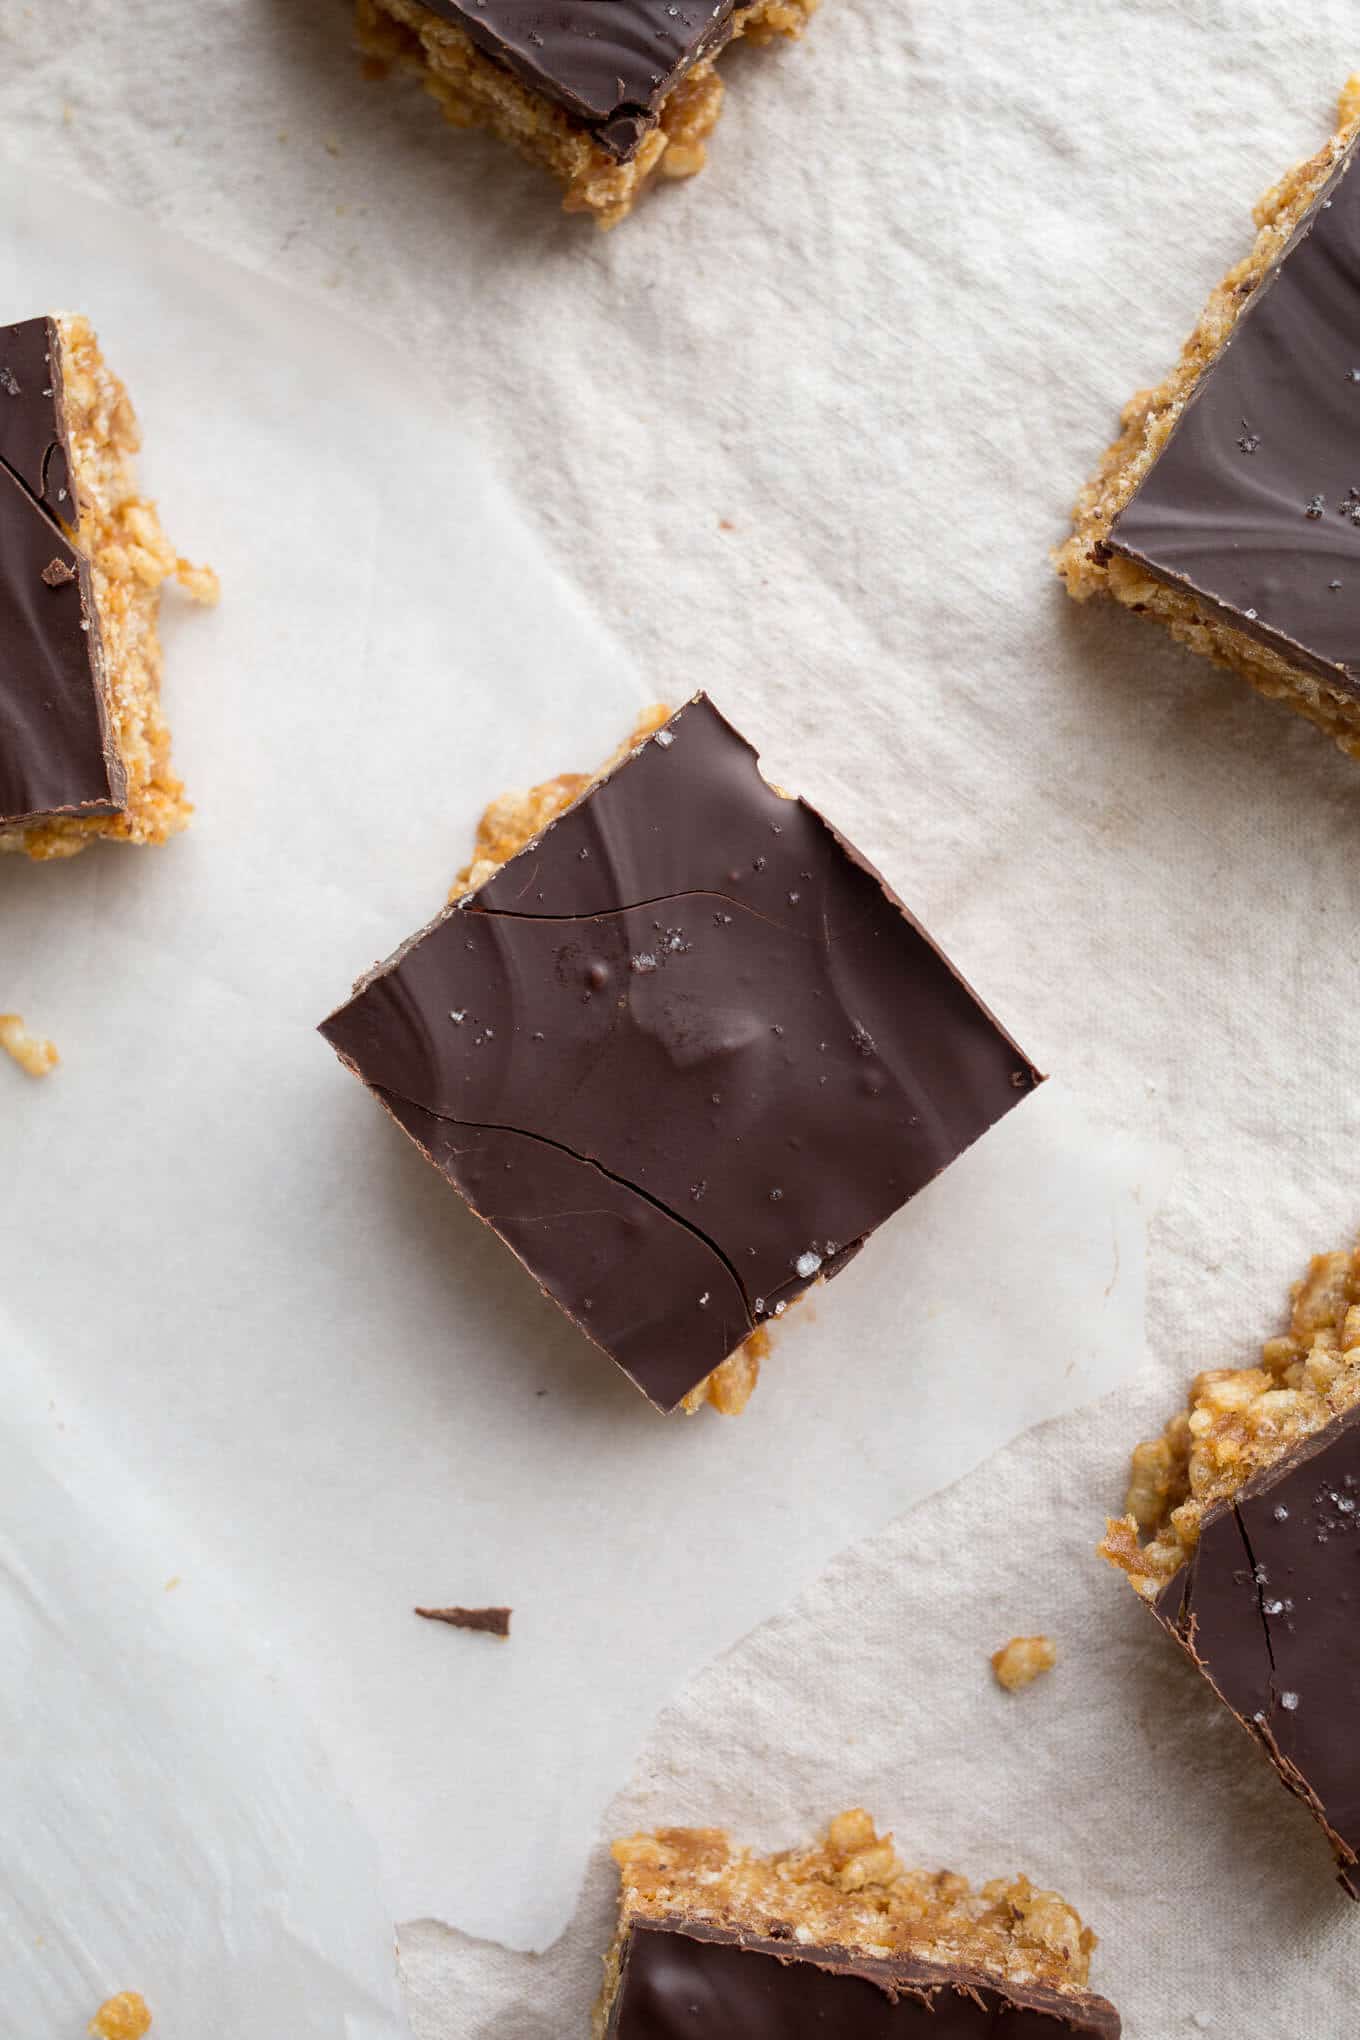 Peanut Butter Maple Scotcheroos are a healthier take on the classic treat. Made with brown rice cereal, peanut butter, maple syrup, and dairy-free chocolate. Gluten-free, vegan, refined sugar-free.